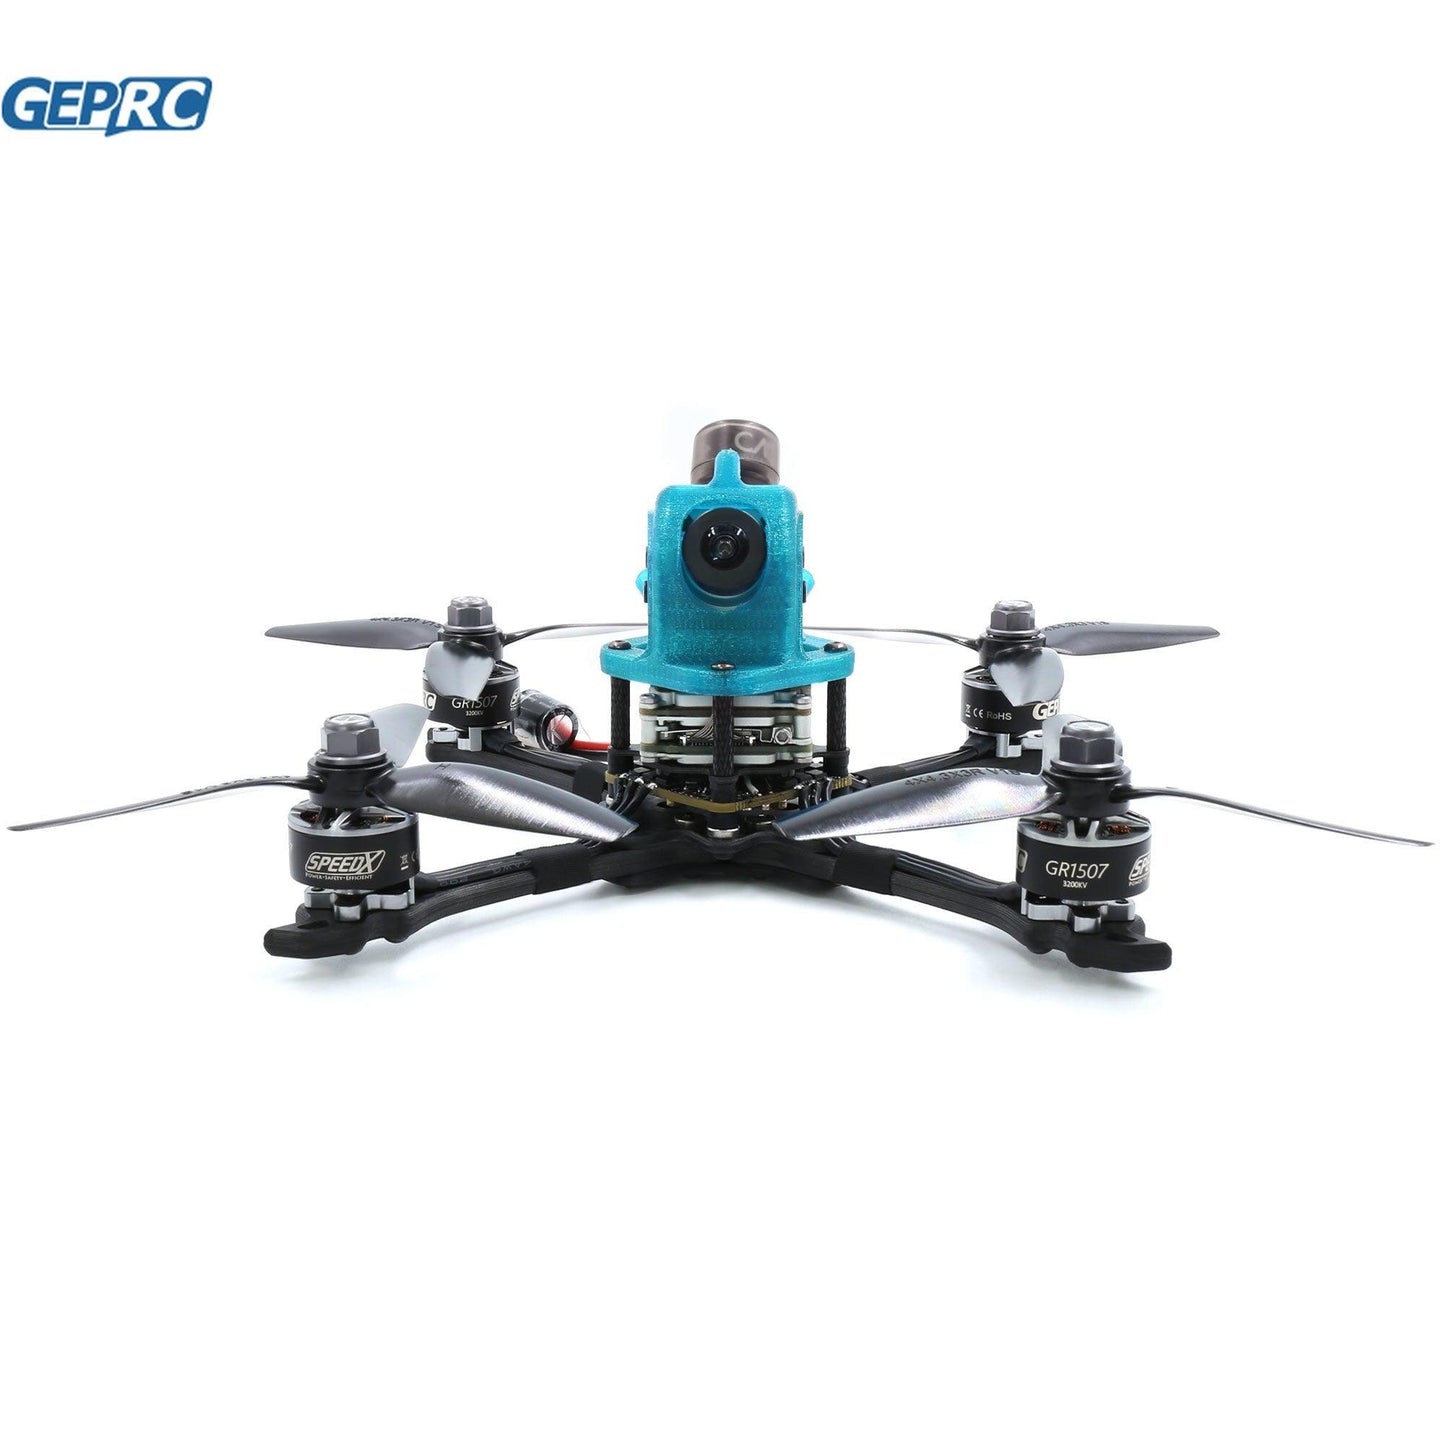 GEPRC Dolphin FPV Drone - HD FPV WITH Caddx Vista HD camera OR Caddx nano camera Fpv Height Maintain Quadcopter RC Dron Toy Gift - RCDrone